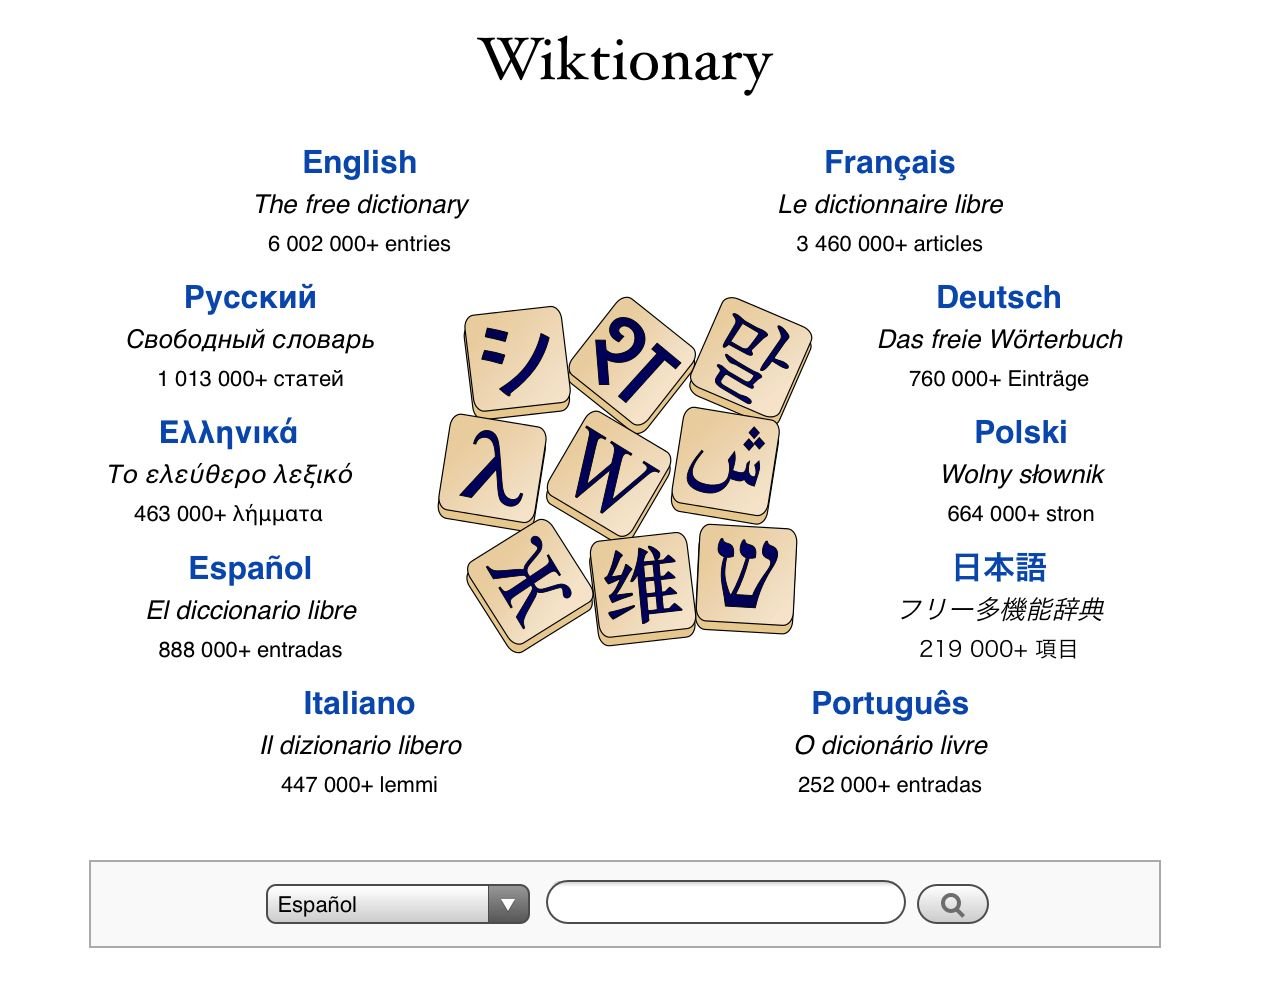 sablier - Wiktionary, the free dictionary